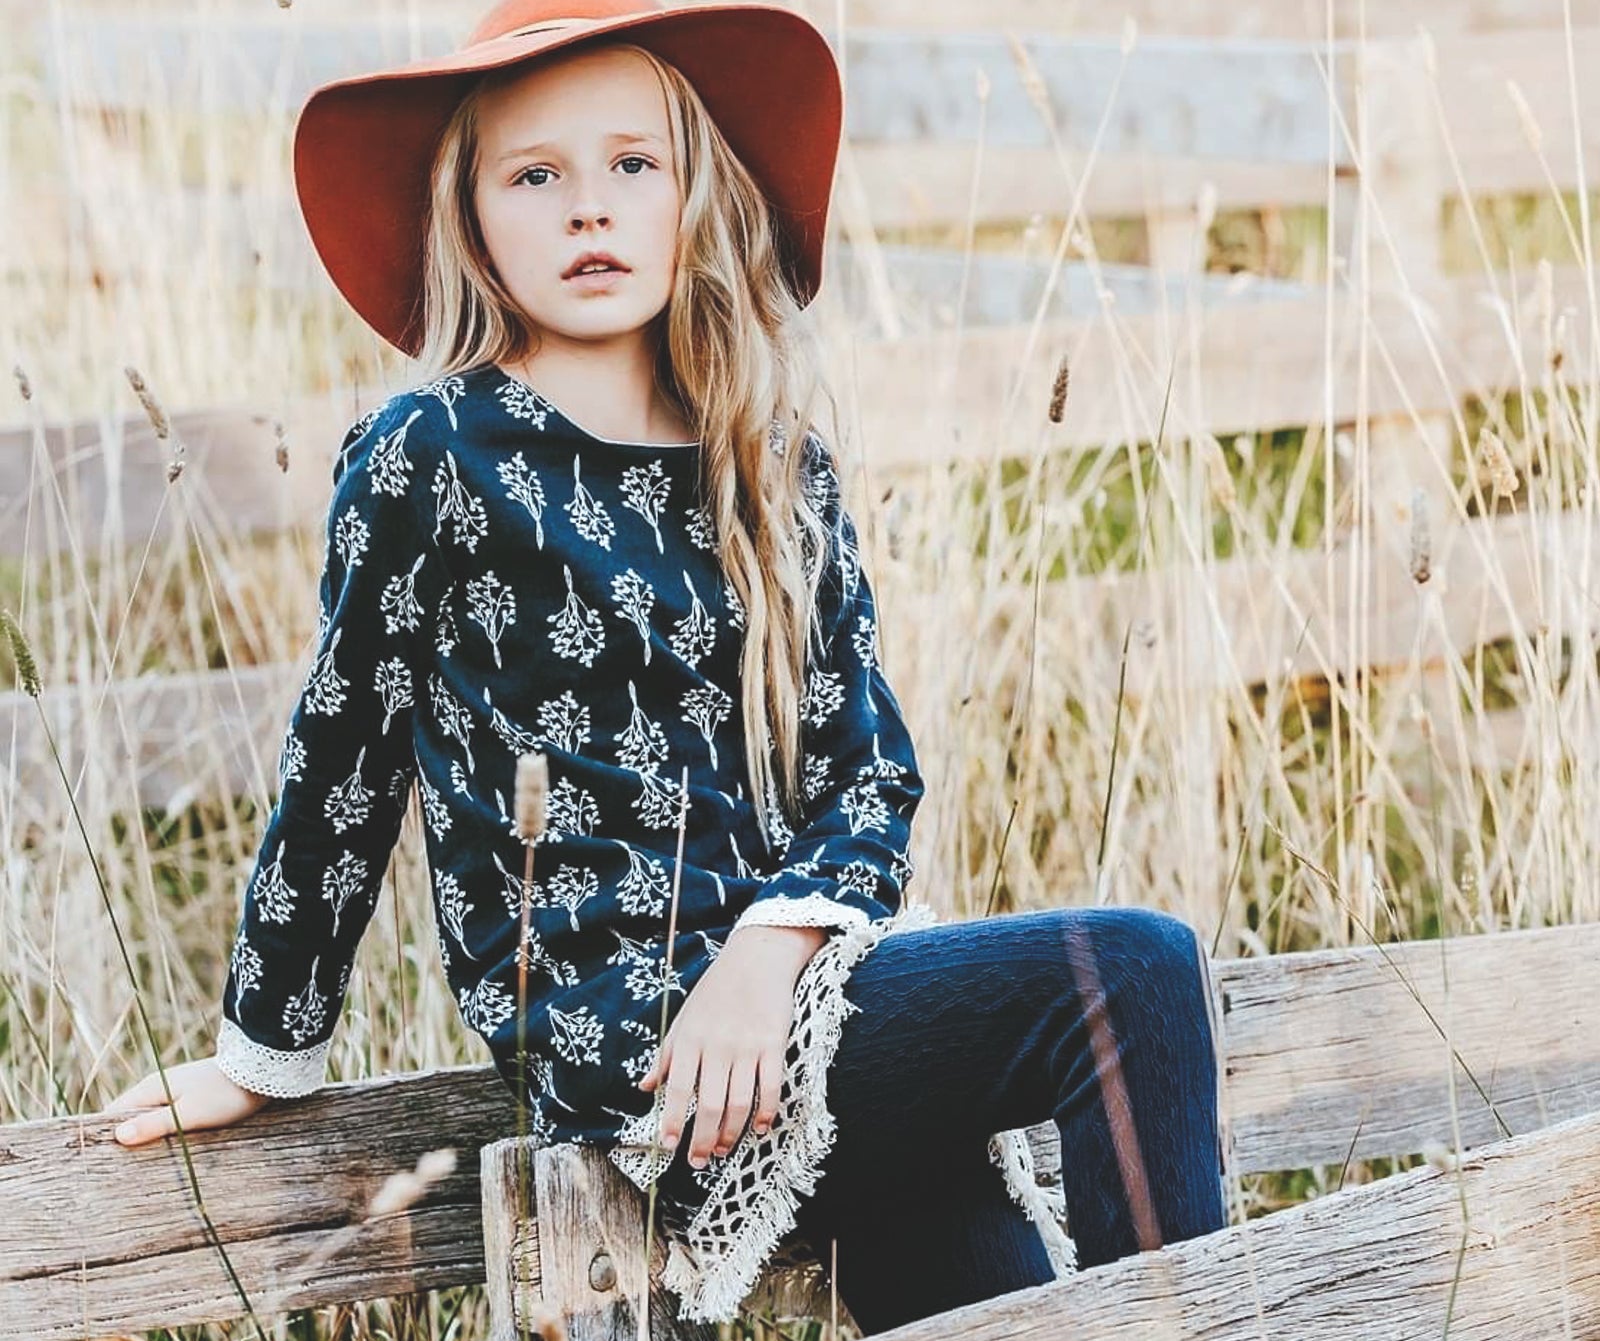 Winter Styling with Kids Fashion Model, Kate Vance